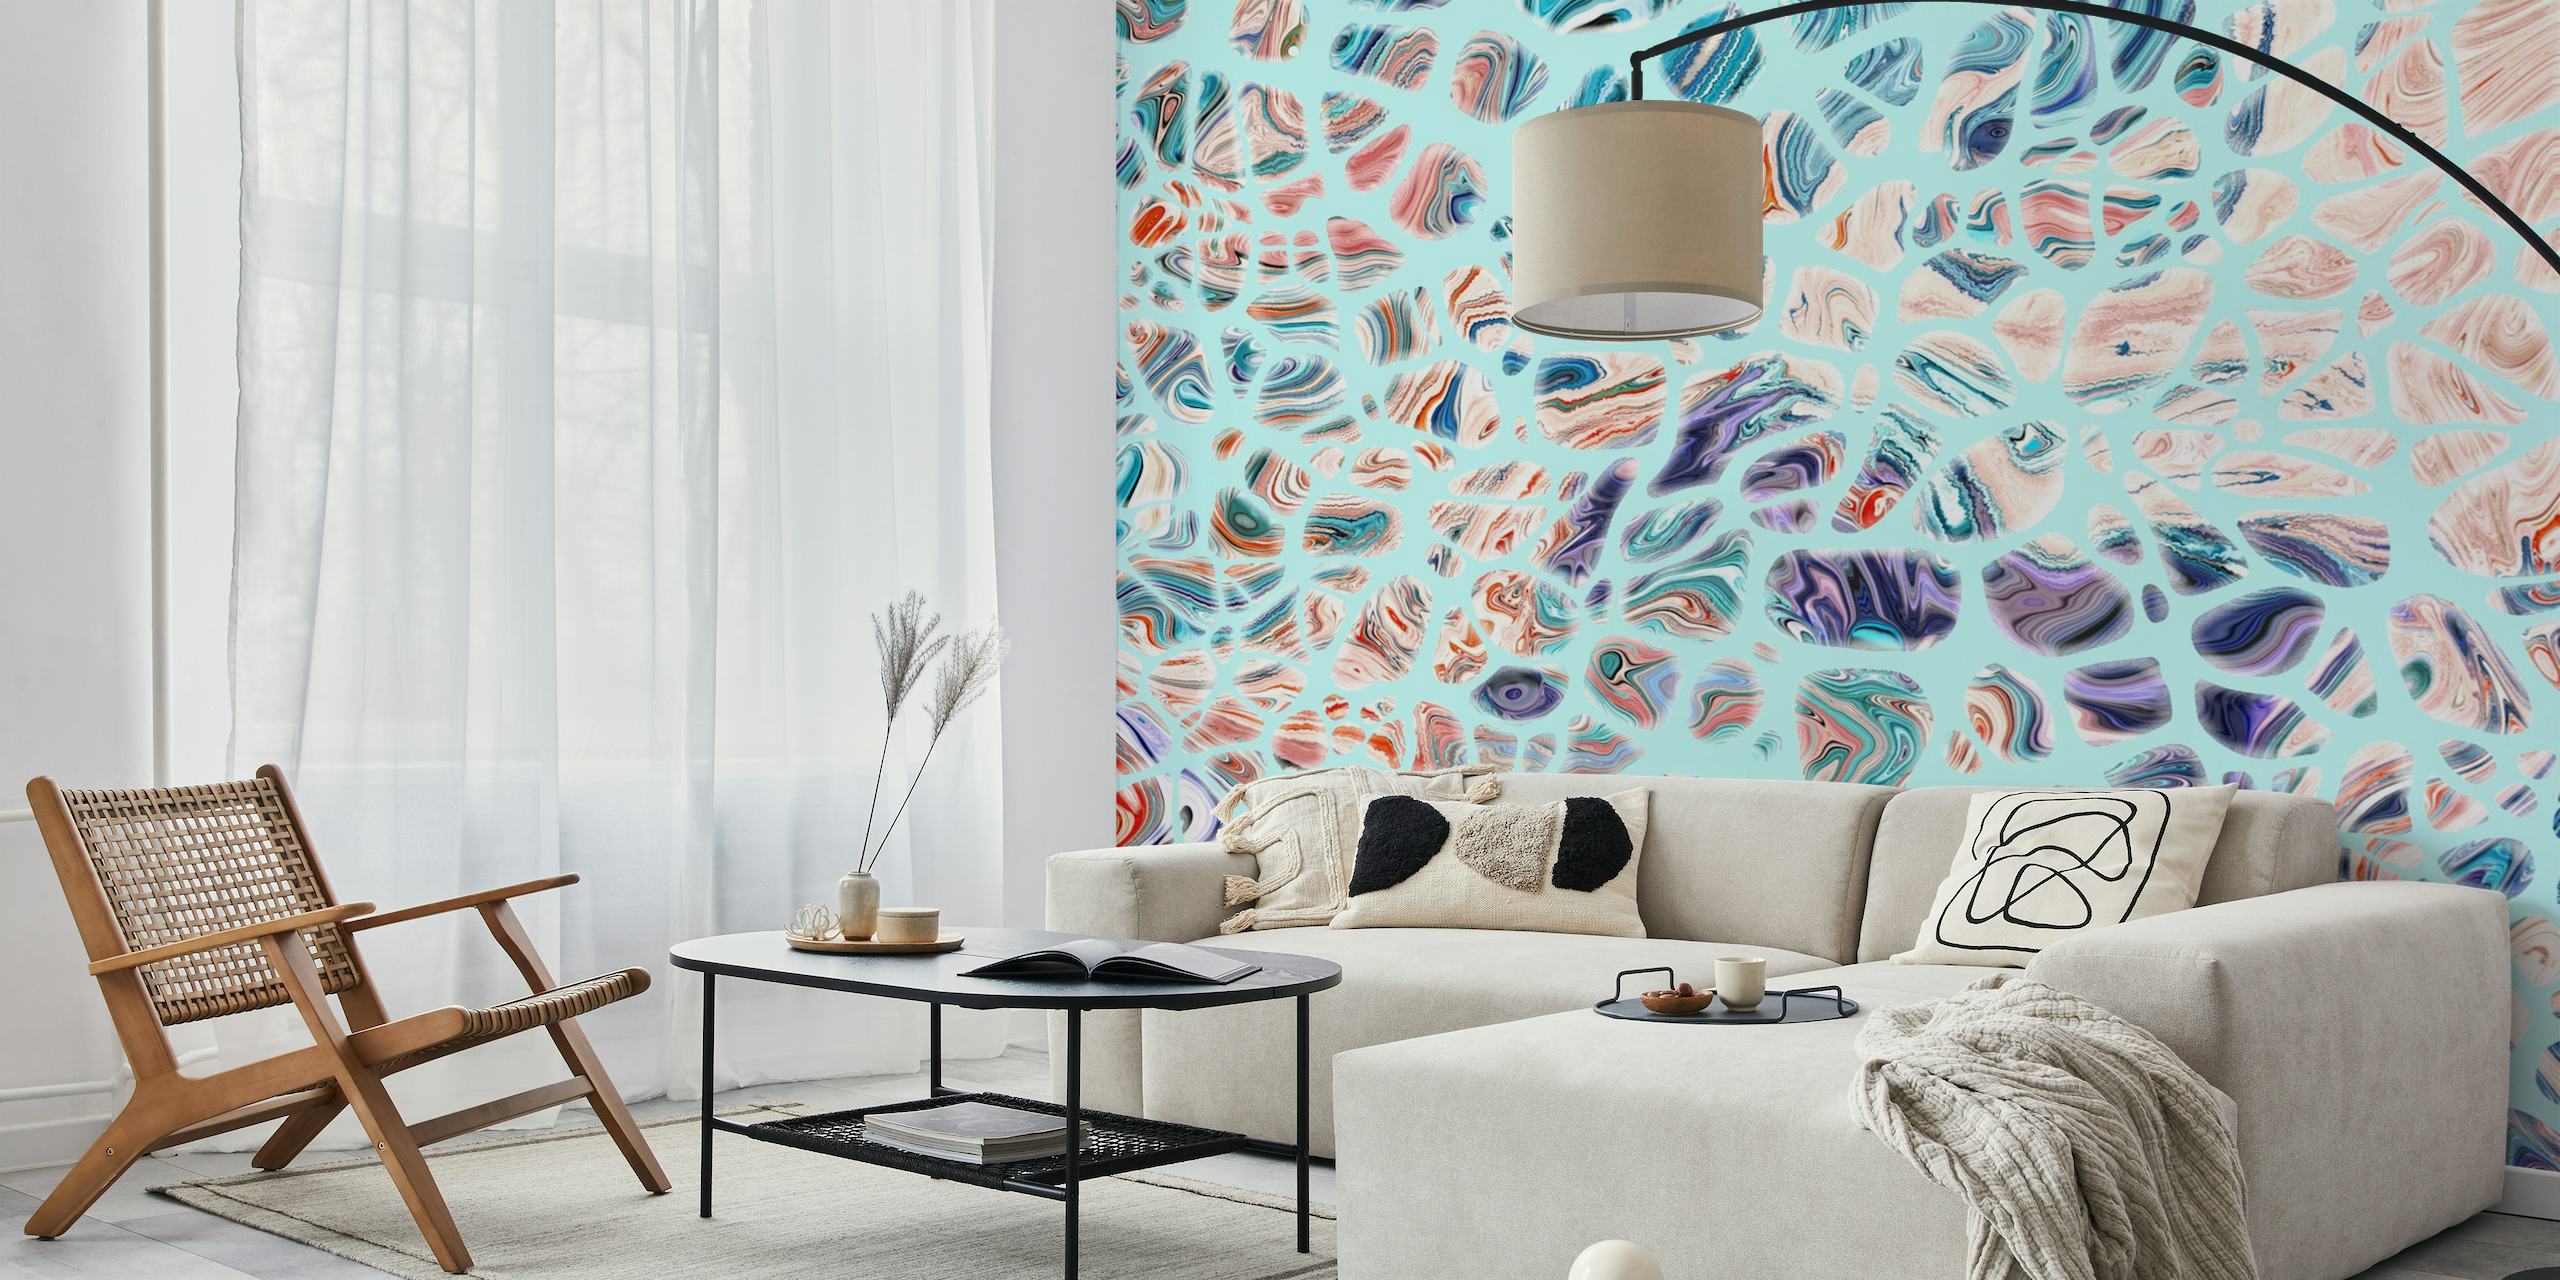 Blue abstract wall mural with swirling patterns in shades of blue and violet.